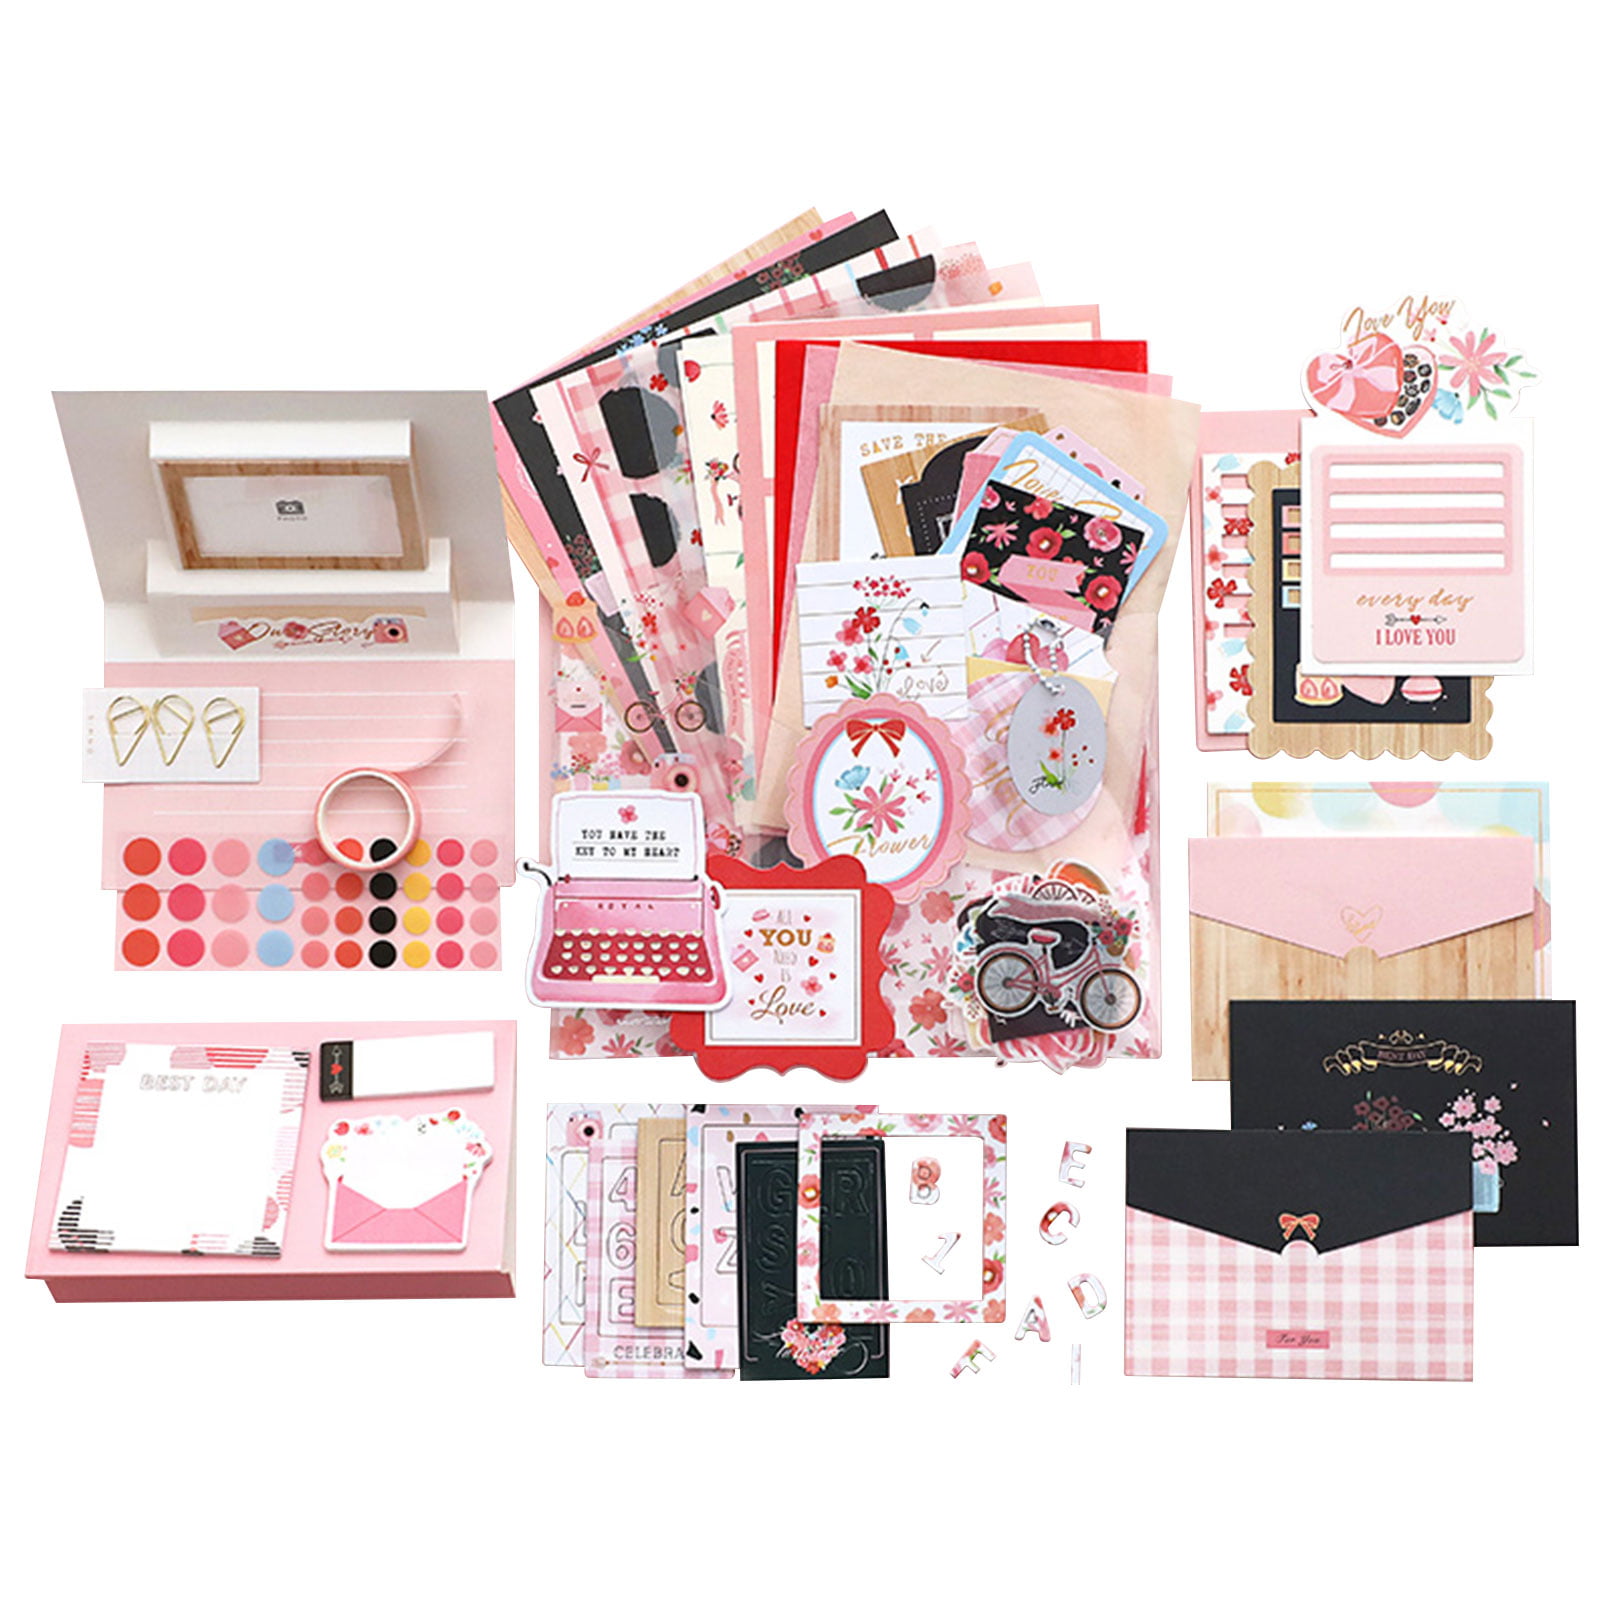 FAYWARE Aesthetic Scrapbook Kit with Small Bullet Journal & Scrapbooking  Supplies - Washi Stickers, Papers, Envelopes & Tape. Gift Set for  Journaling and Arts & Crafts Lovers, Teen Girls & Women 